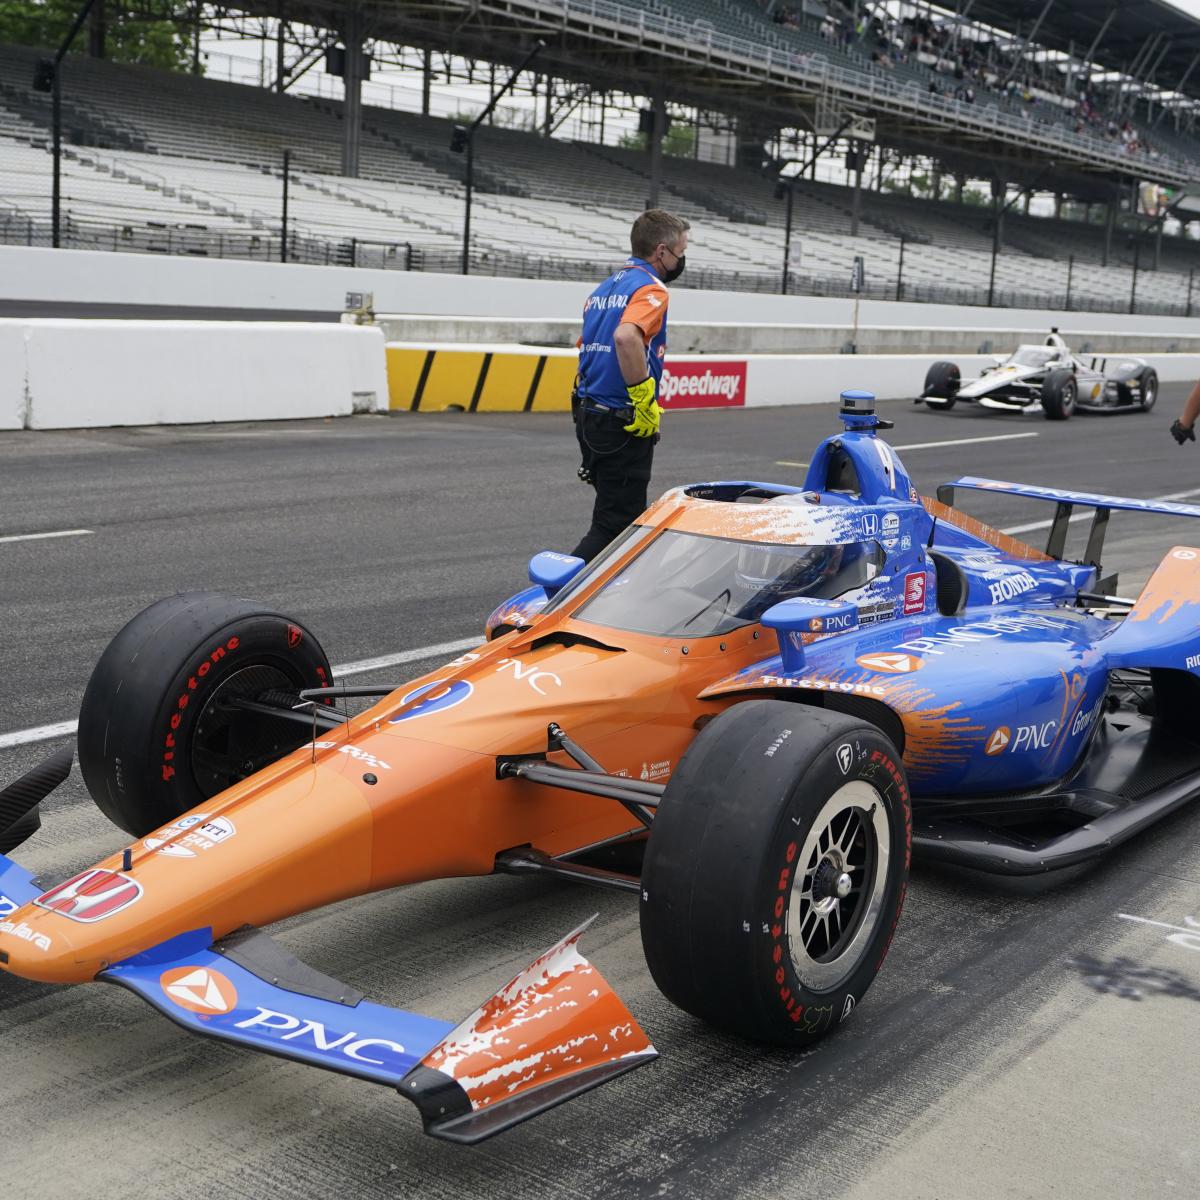 Indy 500 2021 Complete Starting Grid, Lineup, Race Schedule and